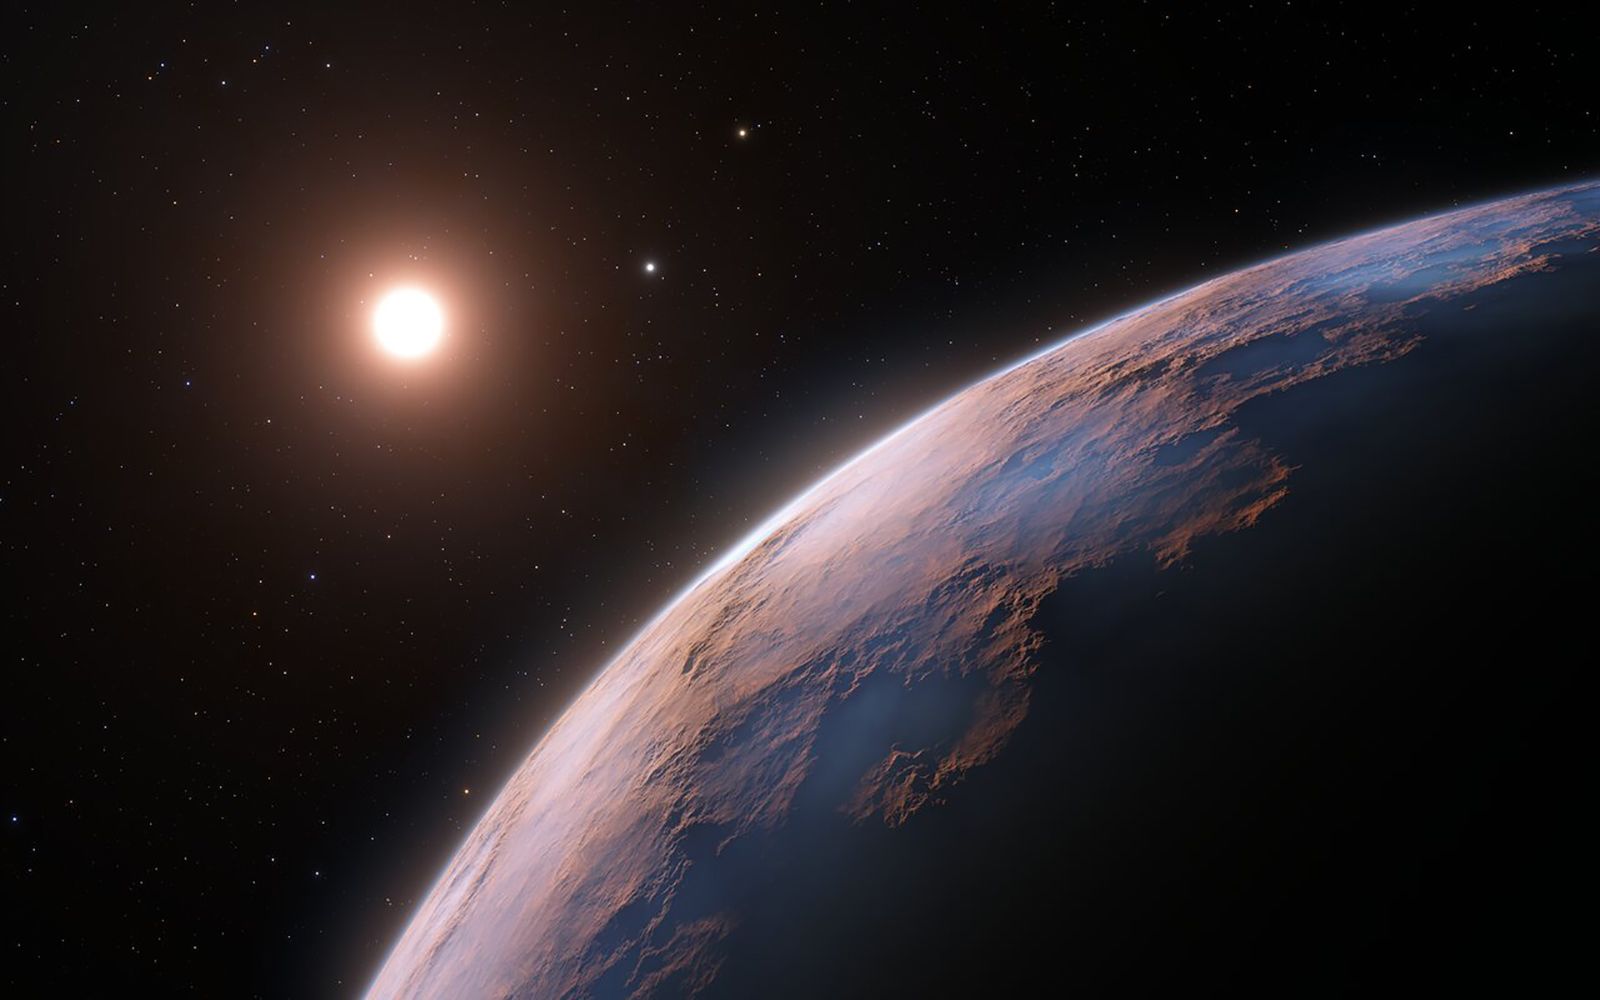 Can a rogue star kick Earth out of the solar system?